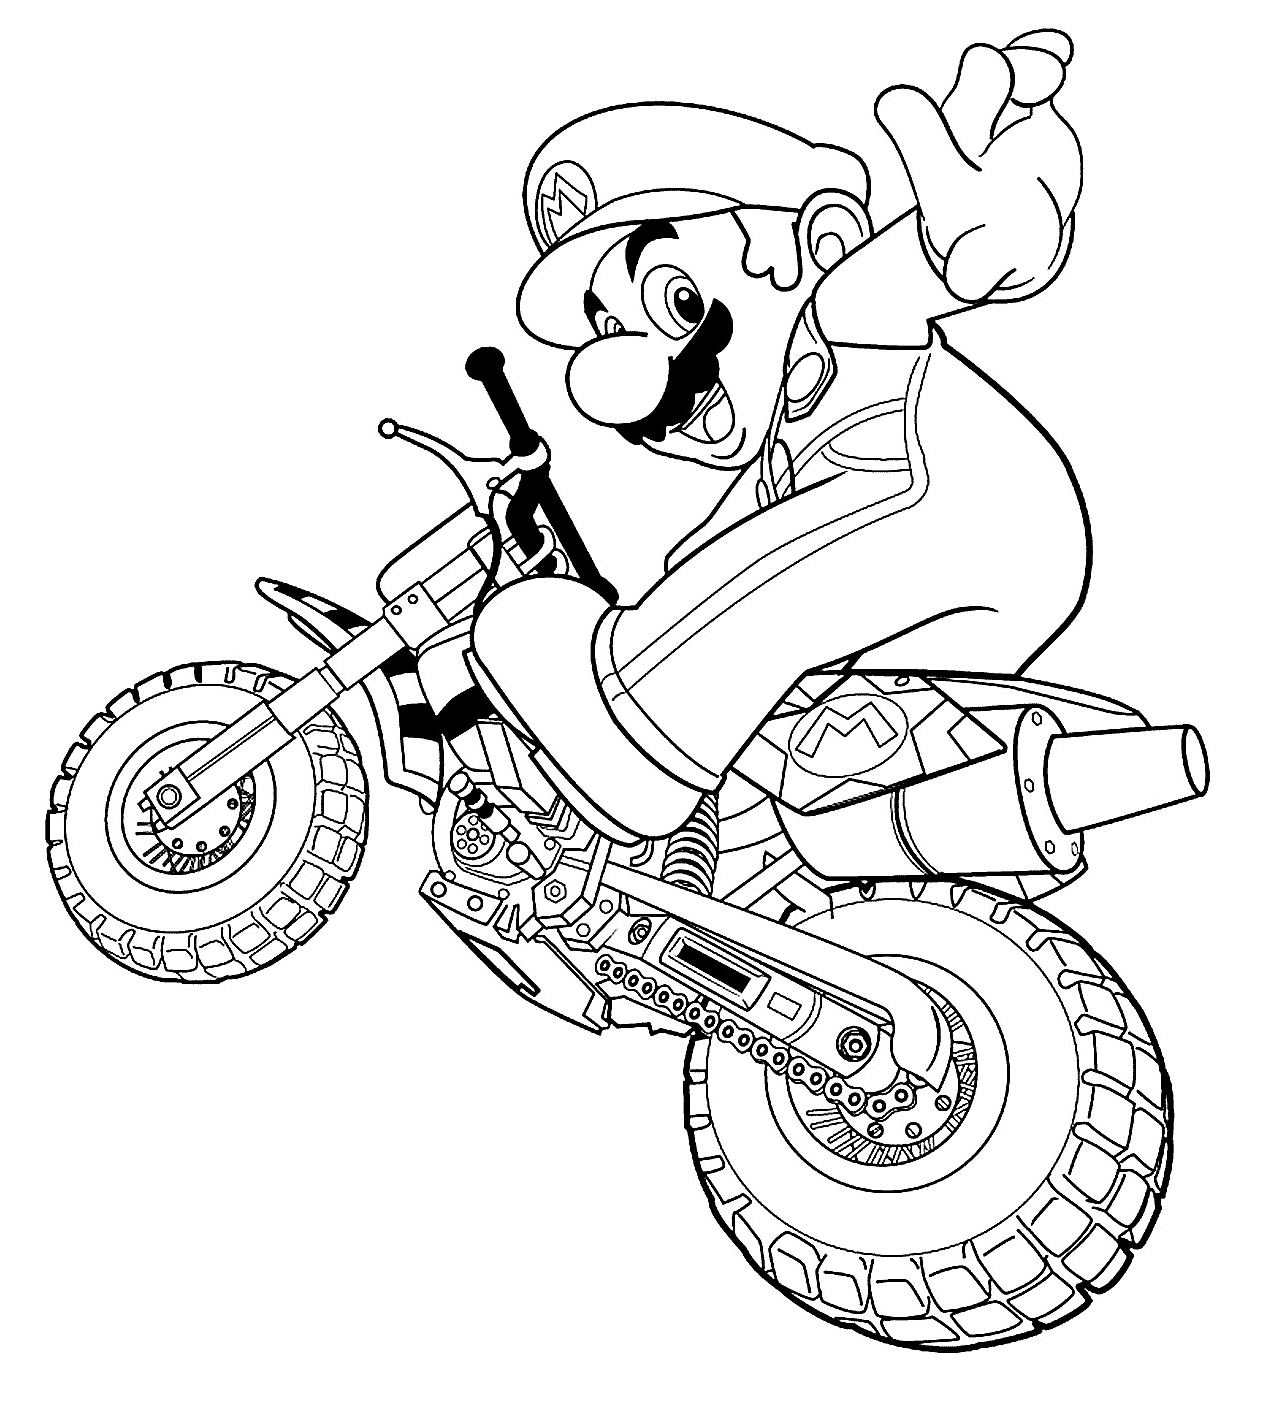 Super Mario with Dirt Bike Coloring Pages